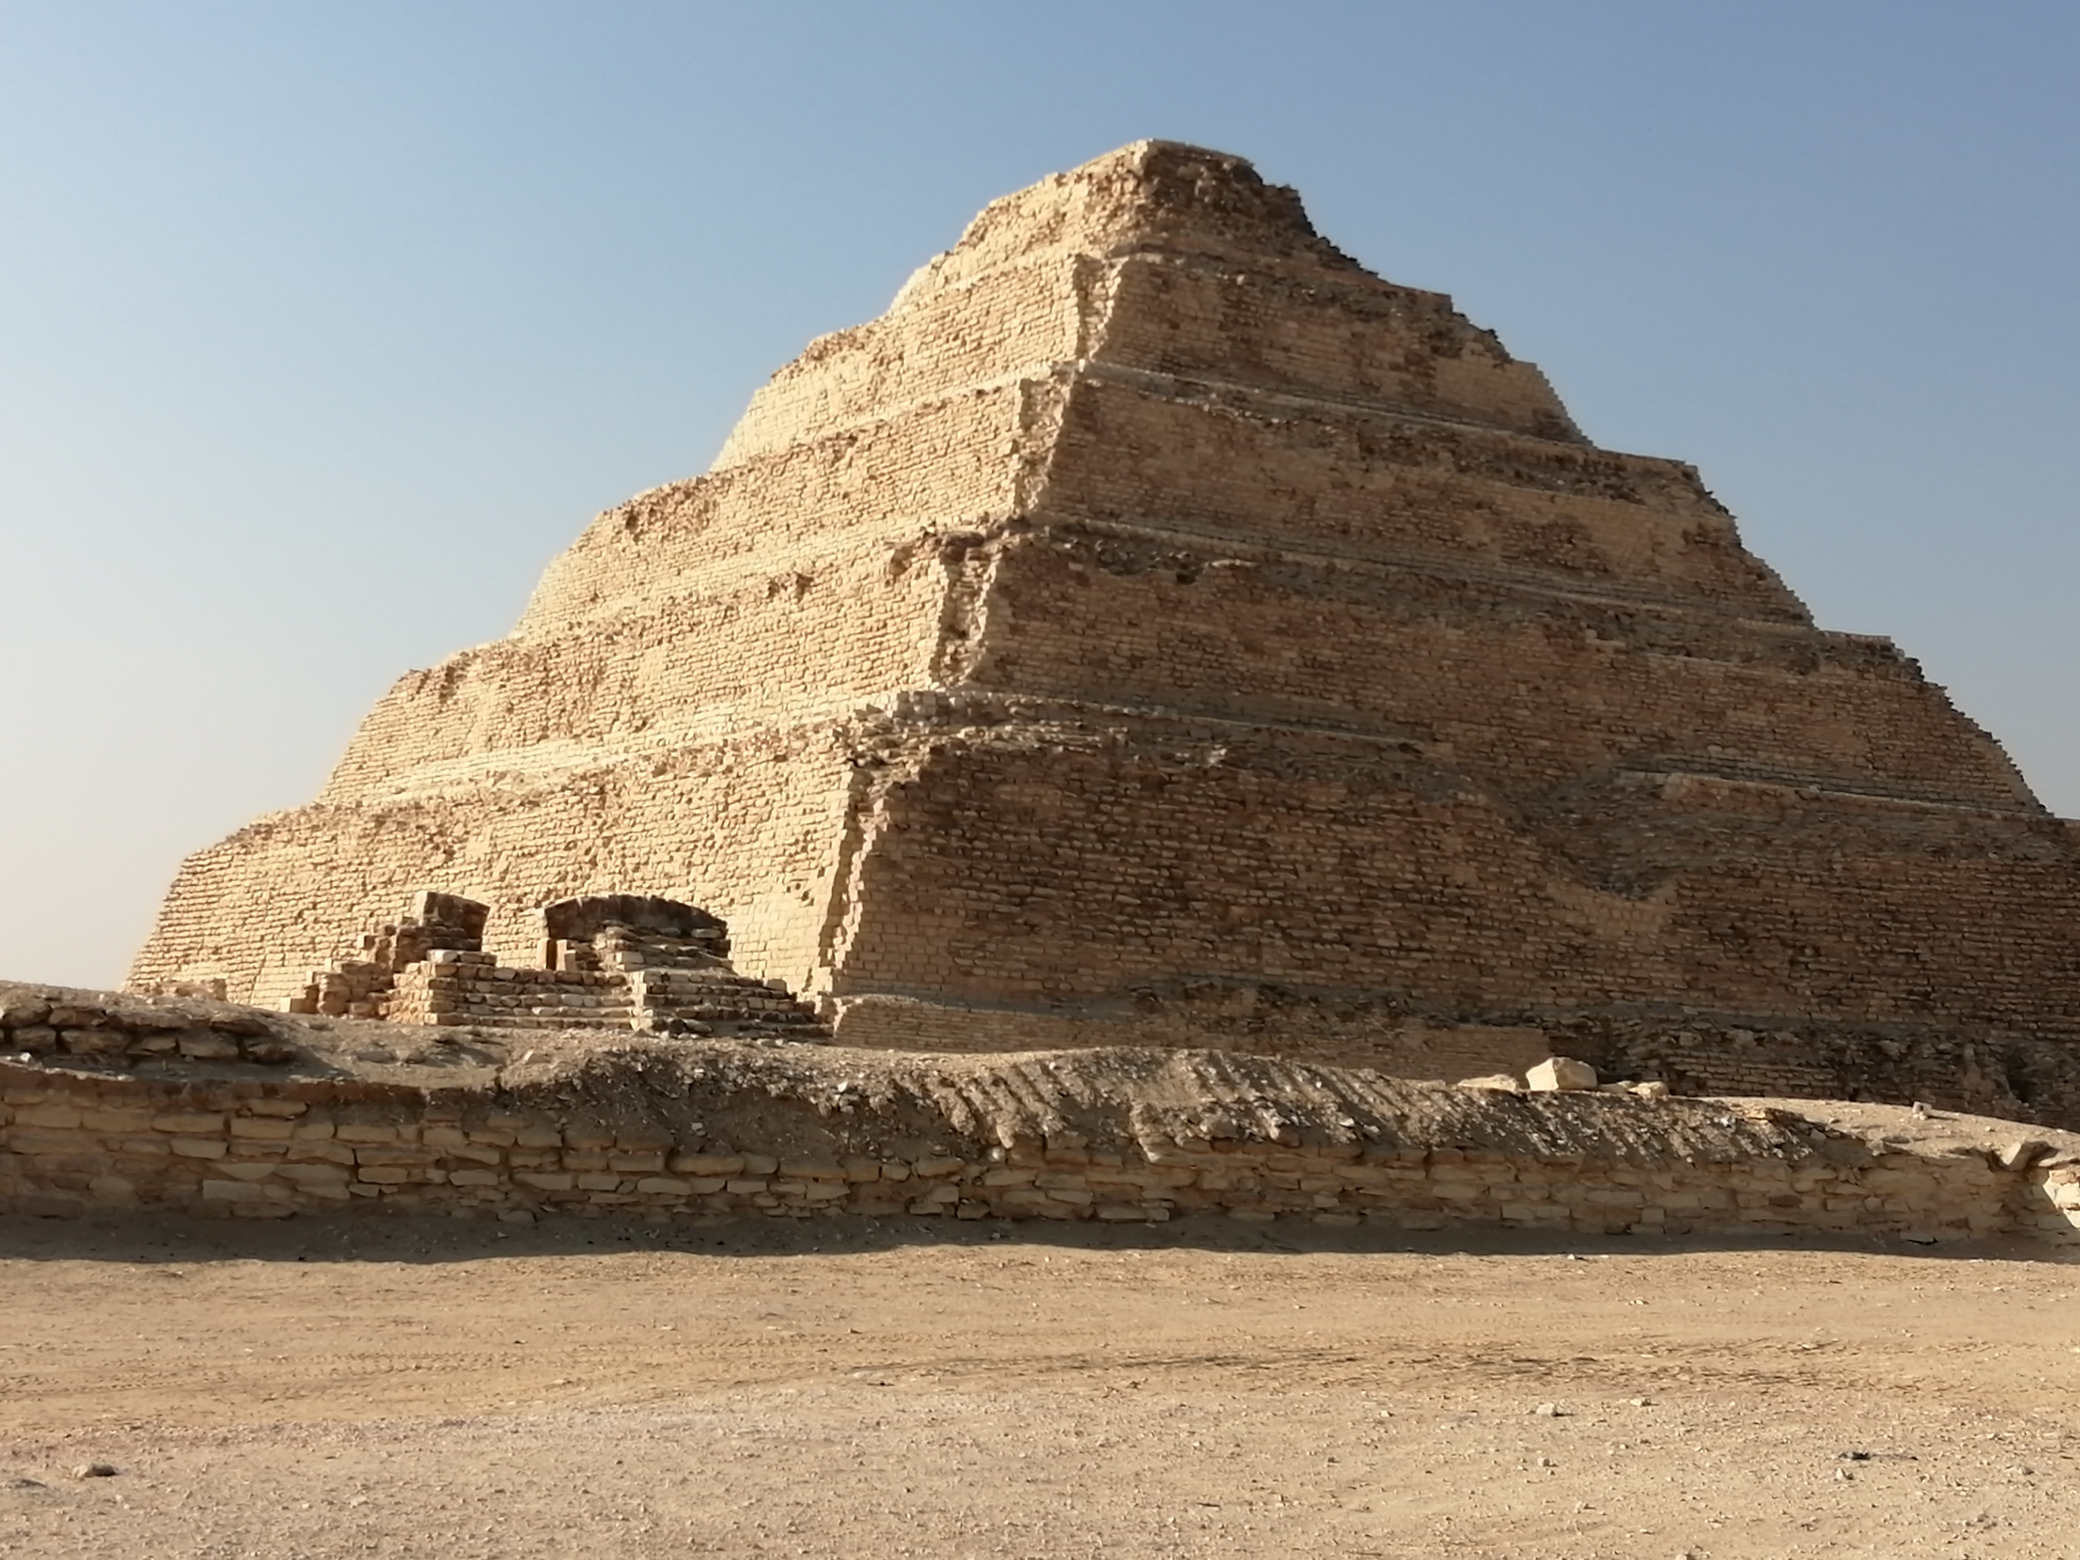 The 1st pyramid ever built in Egypt The Step Pyramid of Djoser